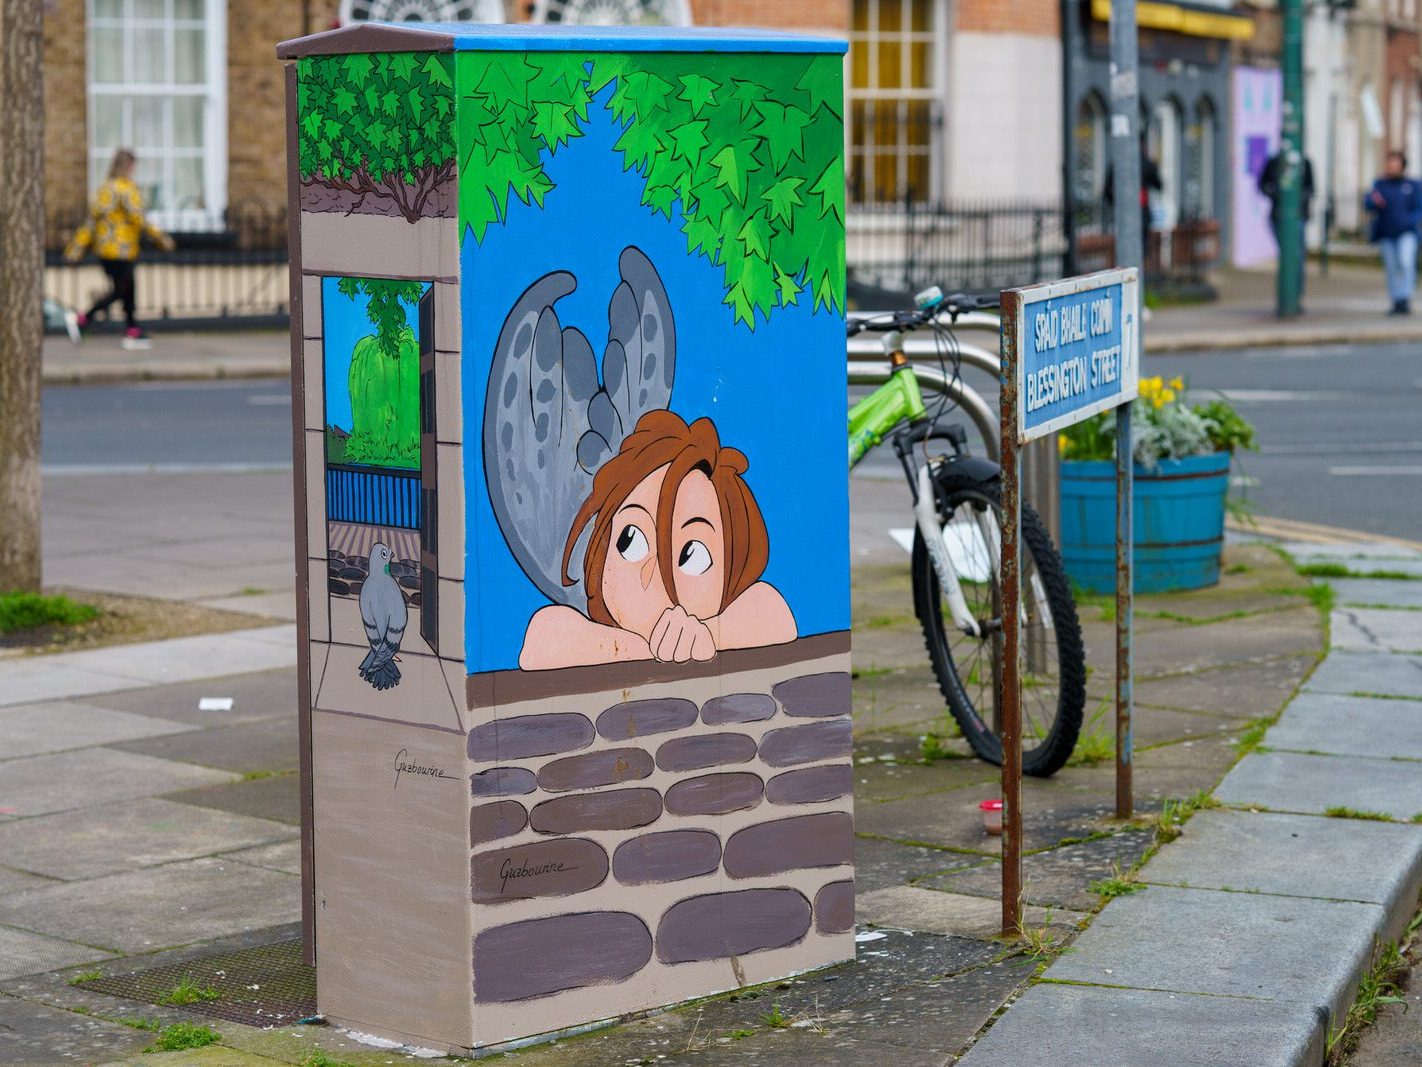 THE BASIN BY LAURA AND CHRISTINA [PAINT-A-BOX STREET ART]-228848-1